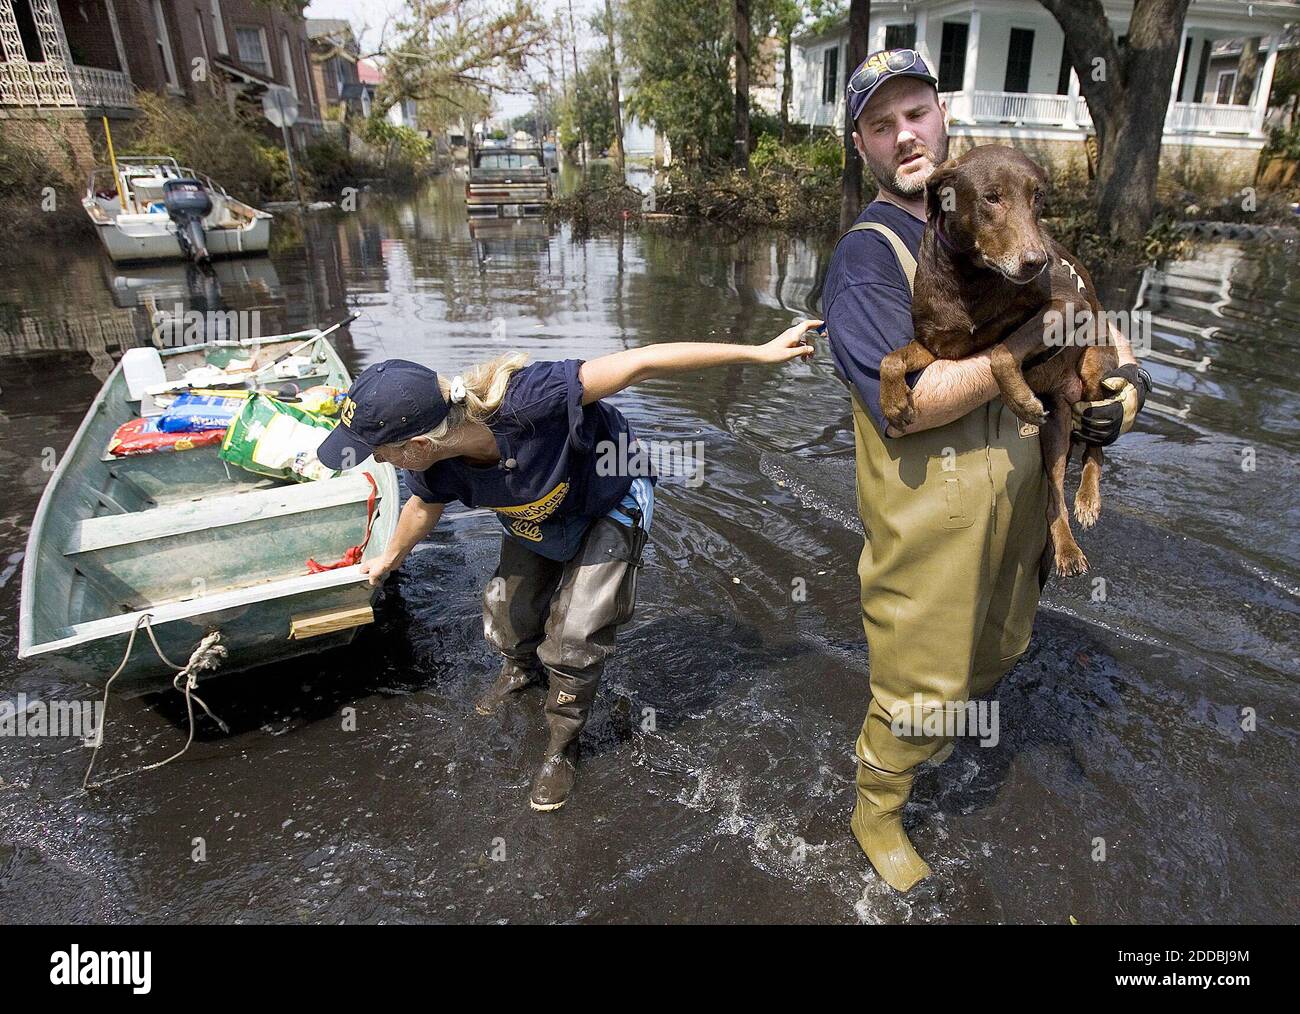 NO FILM, NO VIDEO, NO TV, NO DOCUMENTARY - Humane Society of the United States animal rescue crew member Jane Garrison pulls a rescue boat to shore as Bruce Earnest cradles a dog rescued from a flooded home in the Garden district of New Orleans Louisiana, on Saturday, Sept. 10, 2005. Rescue efforts are ongoing for animals and pets that have been left behind during the Hurricane Katrina evacuation. Photo by Greg Norman NG/Kansas City Star/KRT/ABACAPRESS.COM Stock Photo